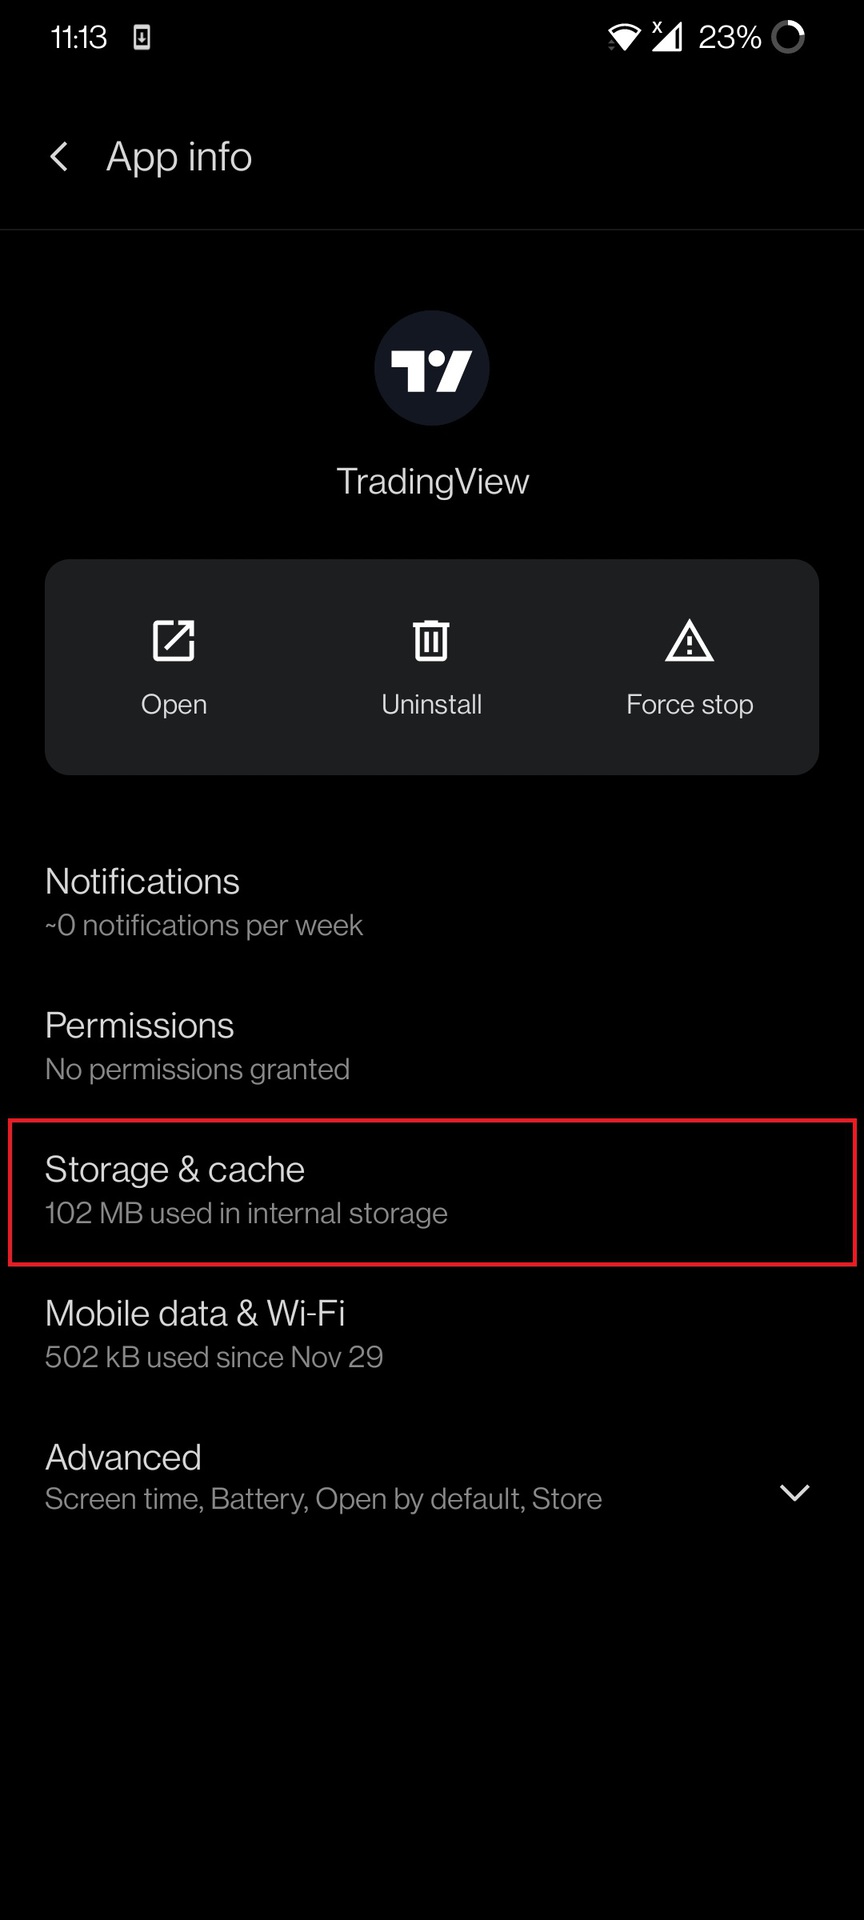 Tap "Force stop" to temporarily stop the app from running
Tap "Storage"